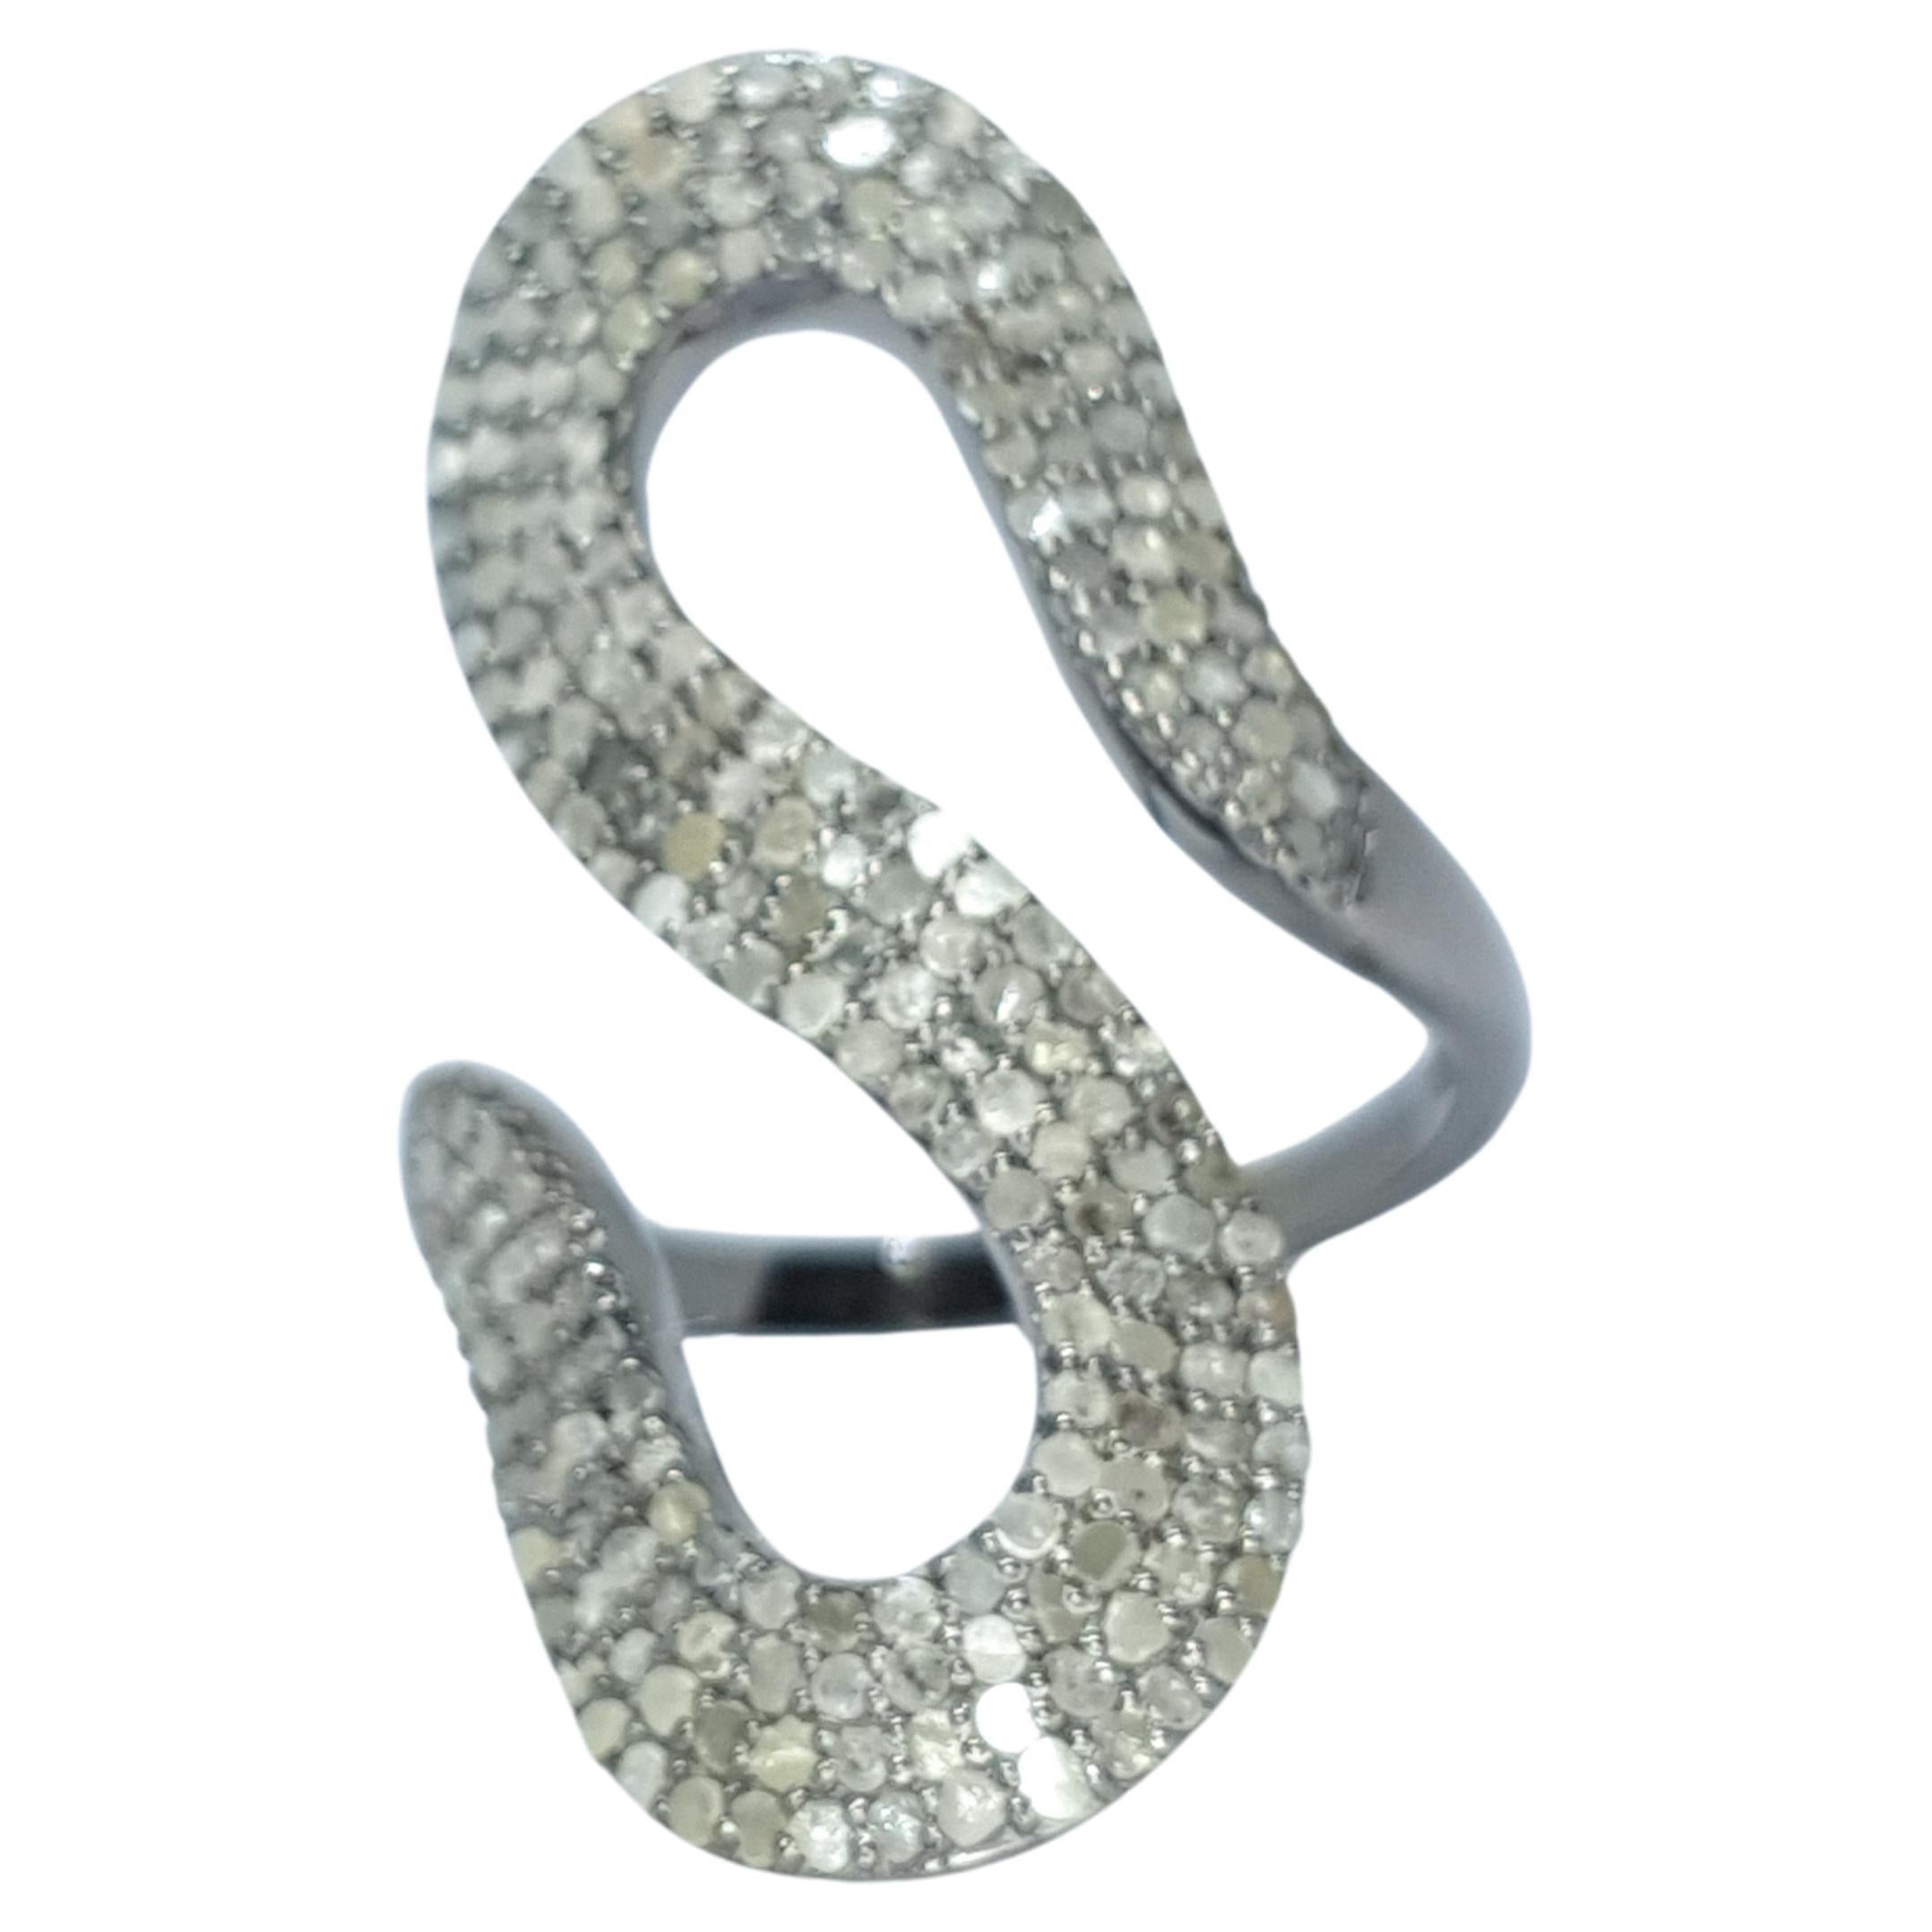 Pave Diamond Snake Shape Statement Ring For Christmas Gift For Women. For Sale